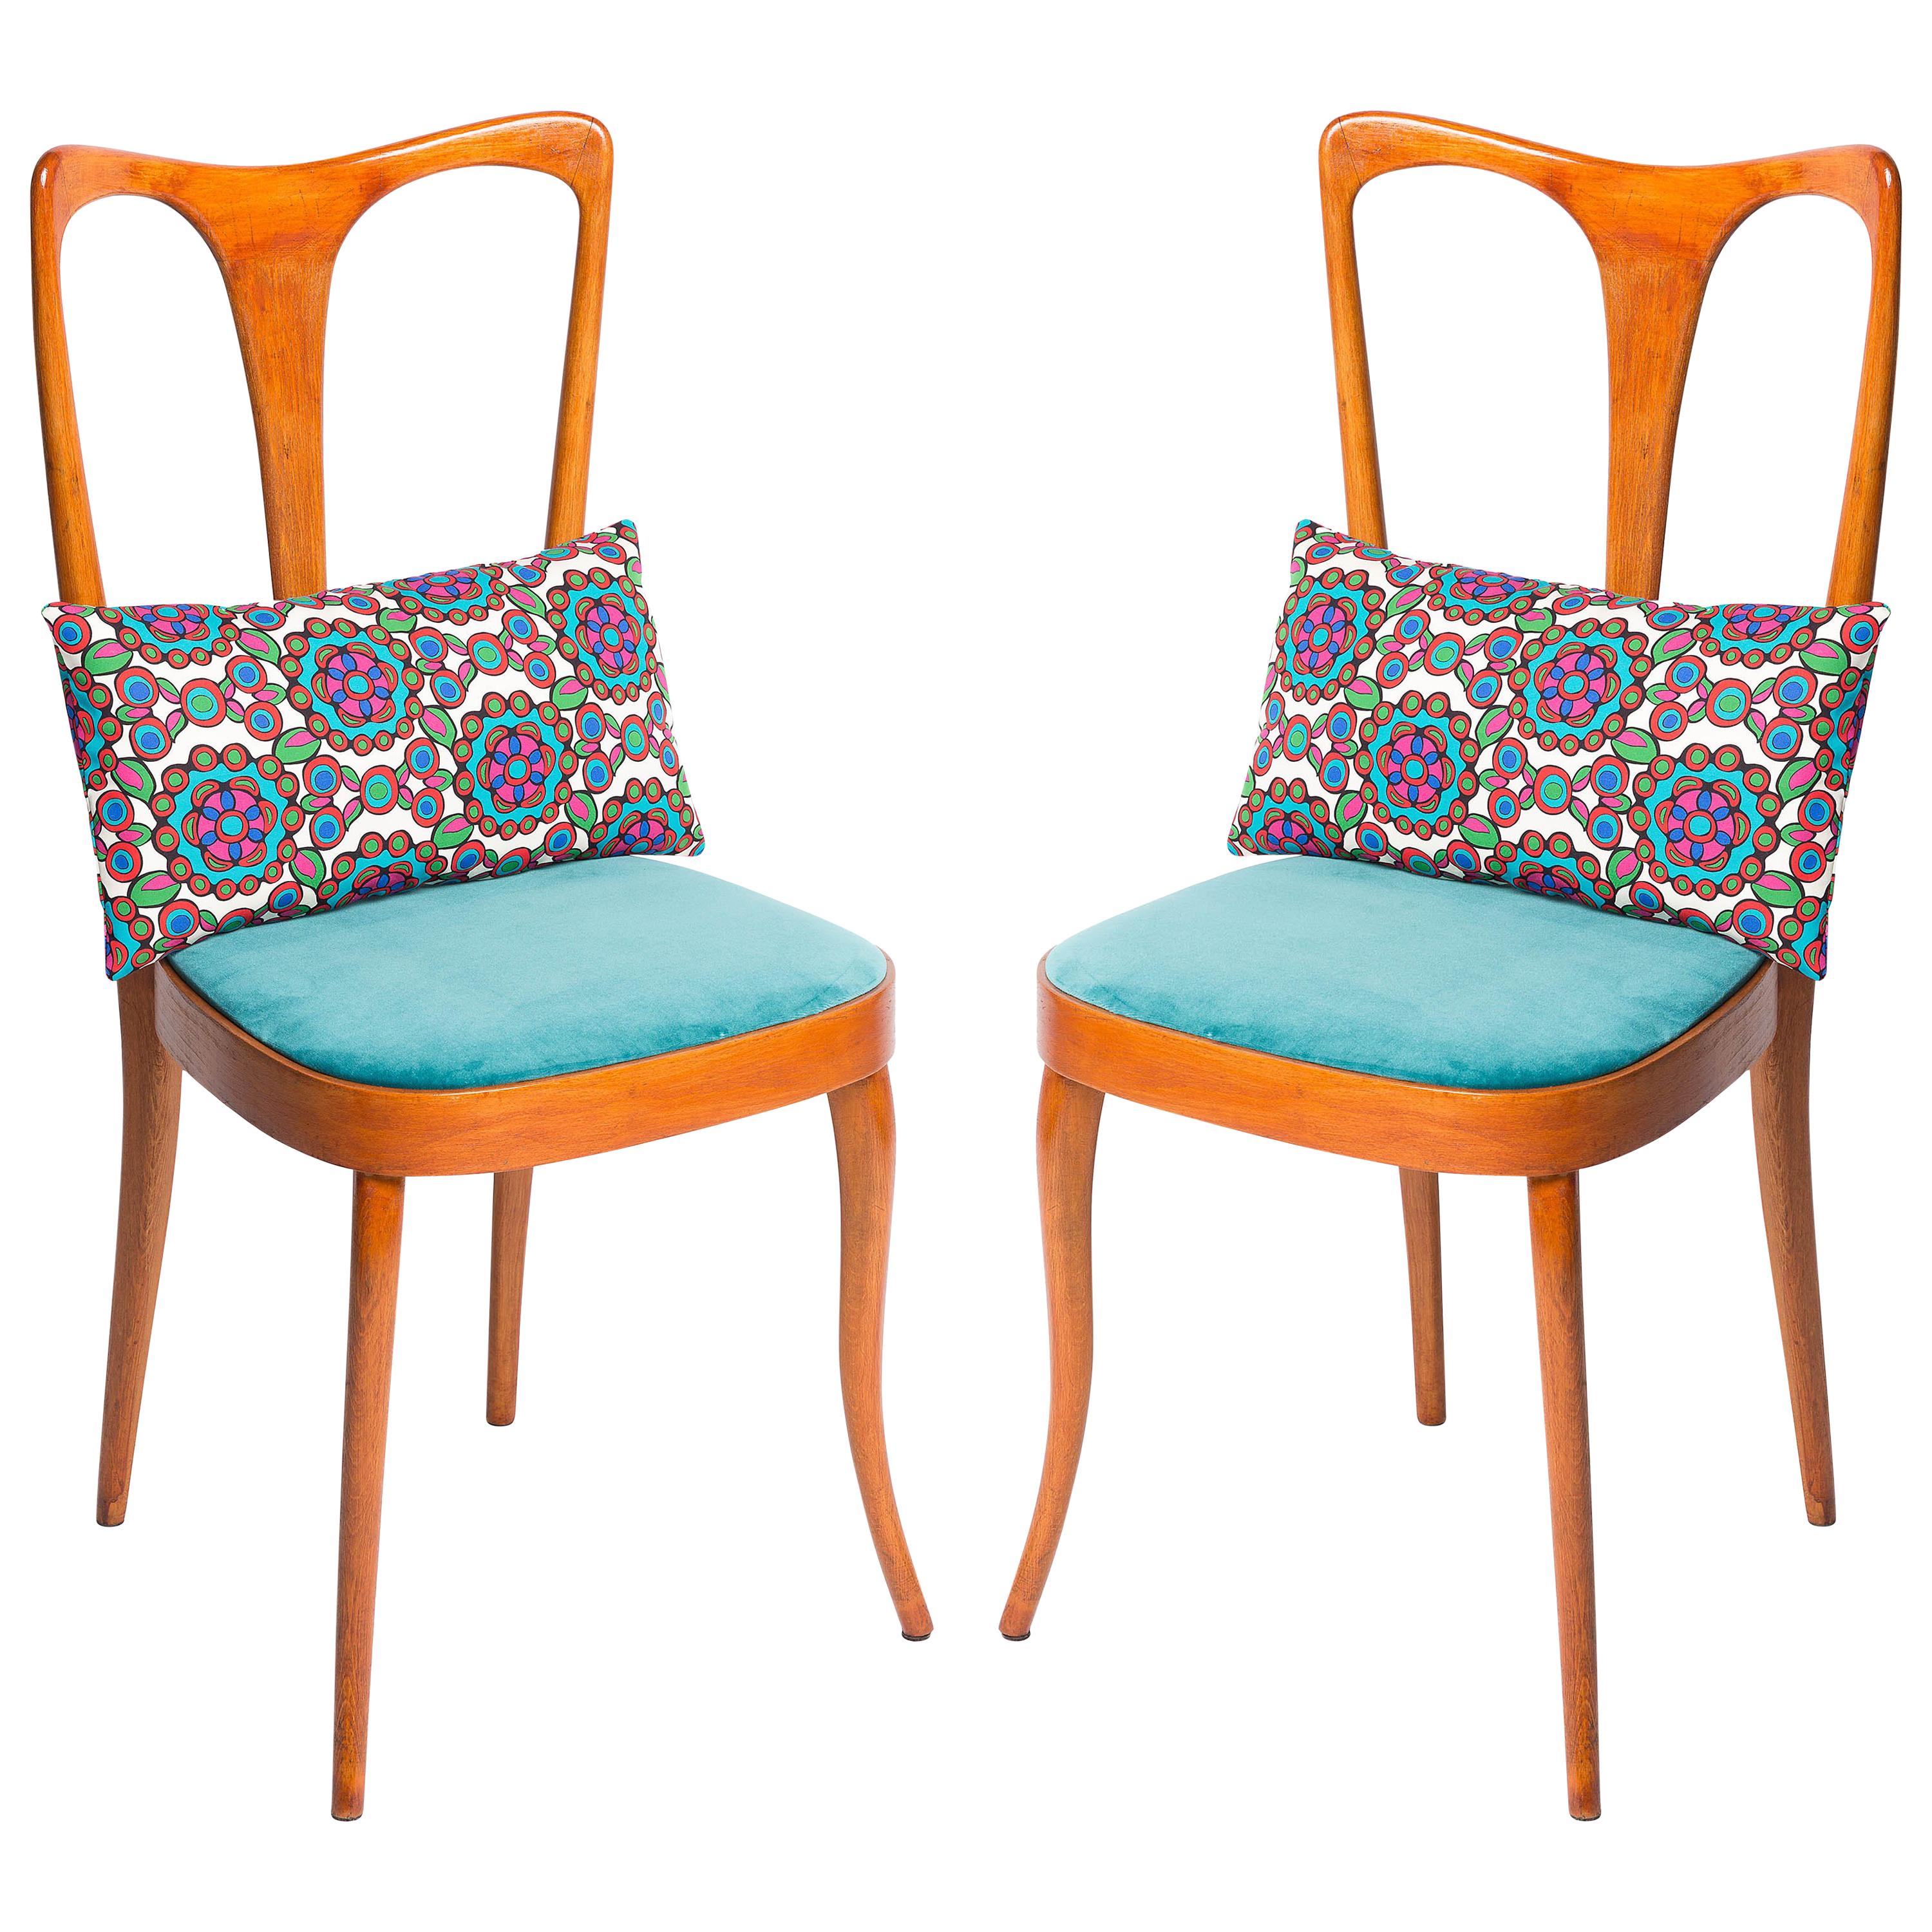 Four Midcentury Italian Birch Chairs with Vintage Print Pillows by LadoubleJ